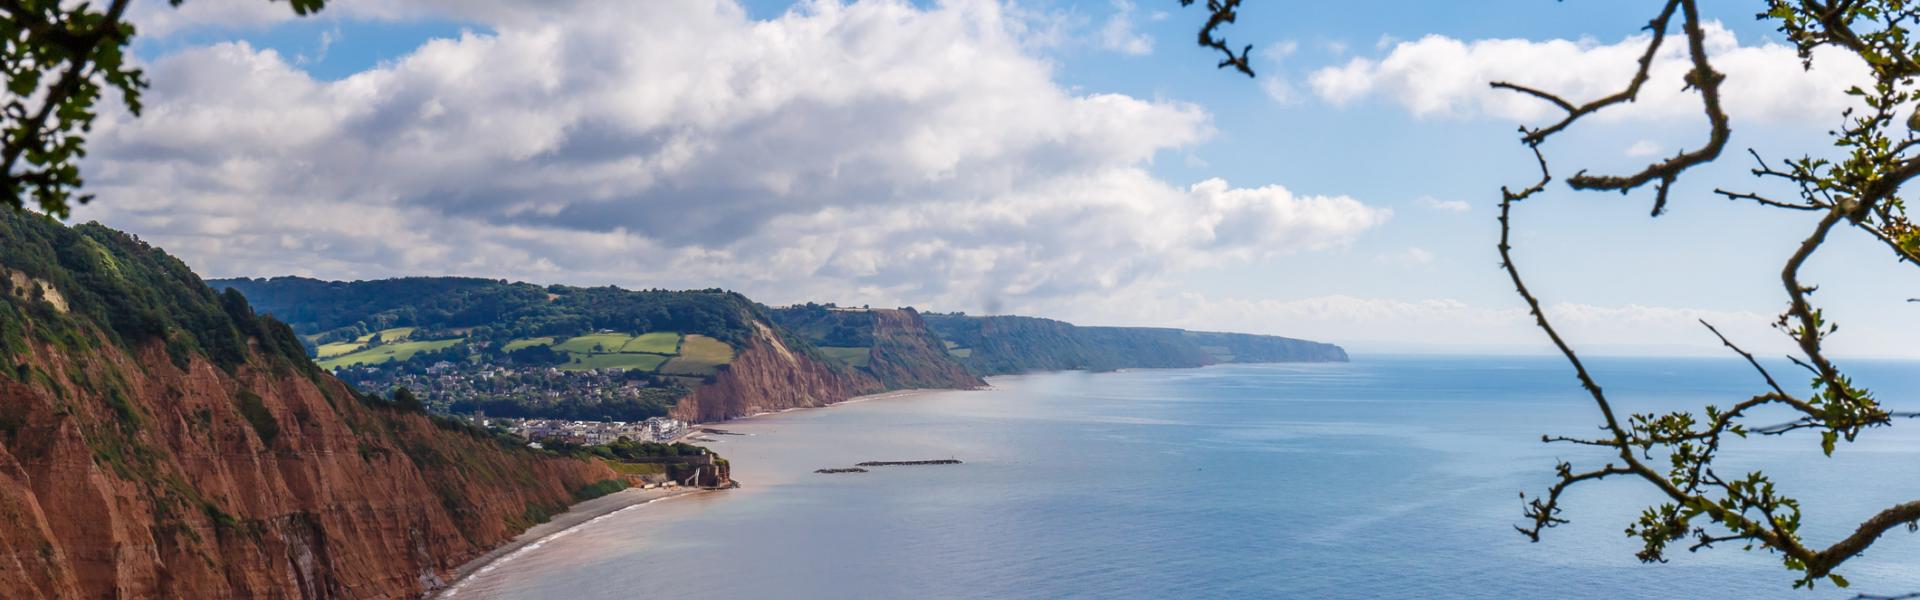 Holiday lettings & accommodation in Budleigh Salterton - HomeToGo